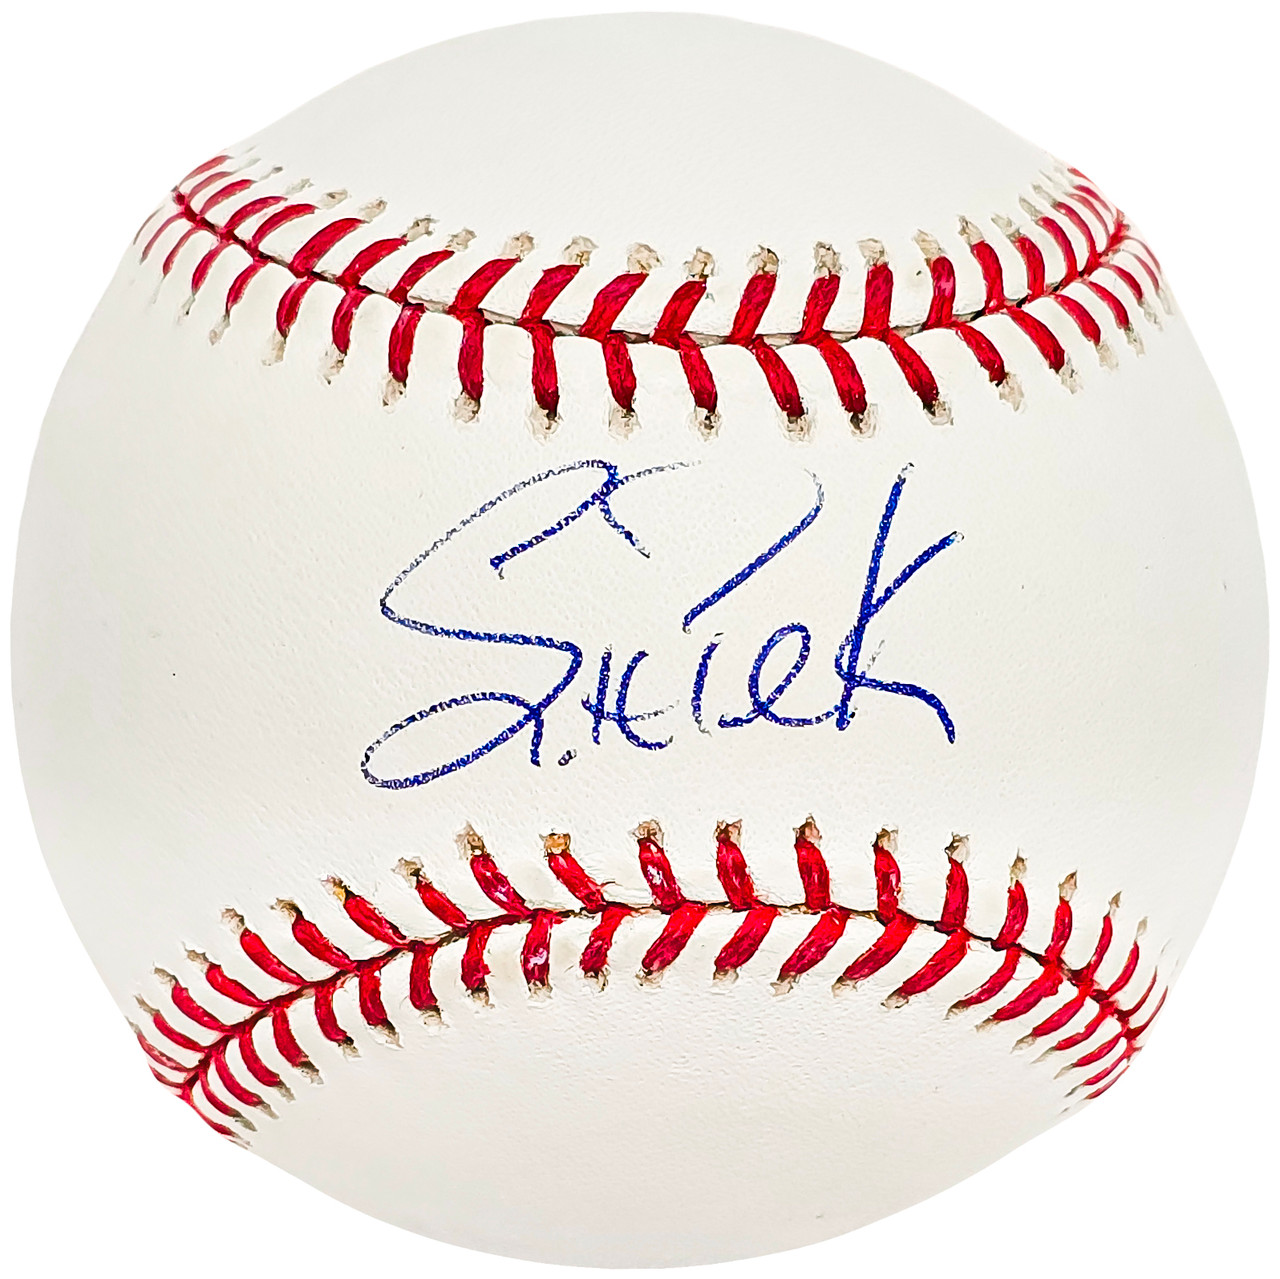 Scott Podsednik Signed Baseball Autograph Auto - In Display W/Stand